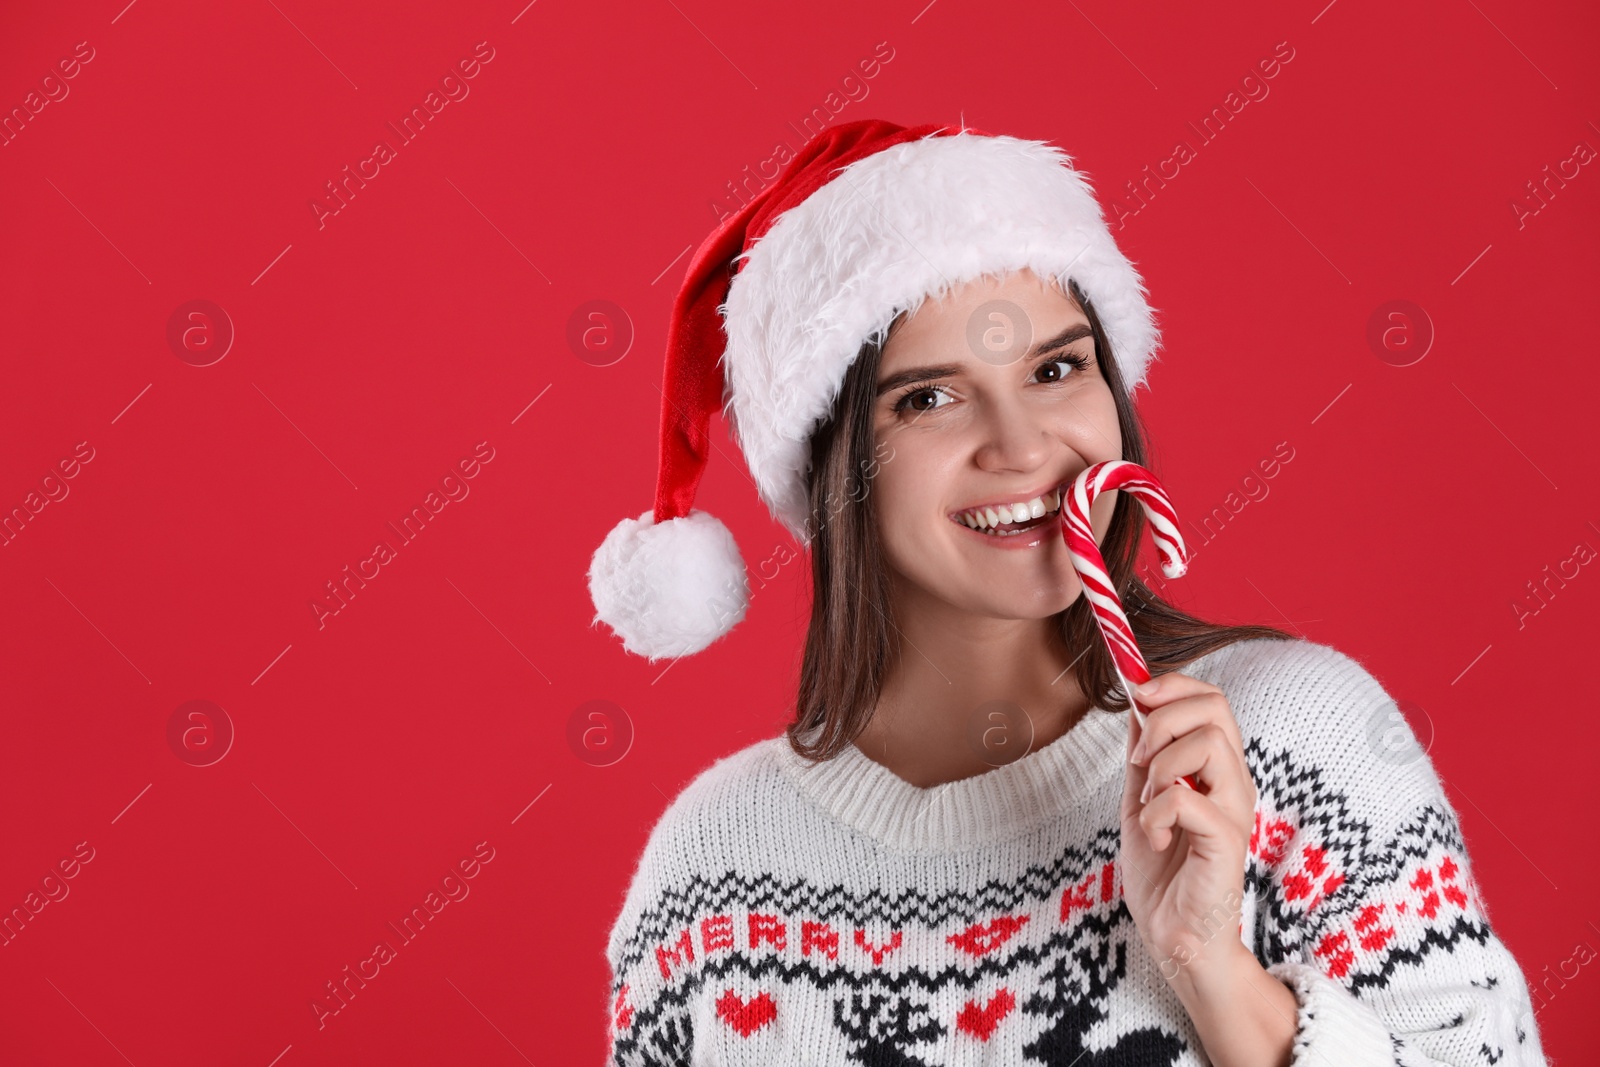 Photo of Pretty woman in Santa hat and Christmas sweater holding candy cane on red background